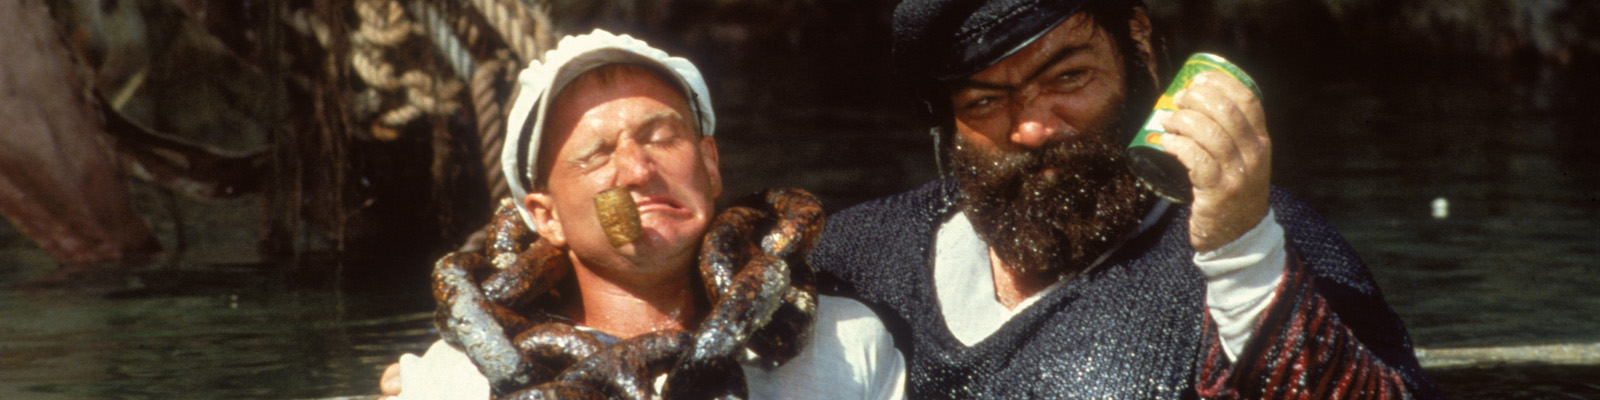 Paul L. Smith as Bluto catches Popeye (Robin Williams) in the water in Robert Altman's Popeye